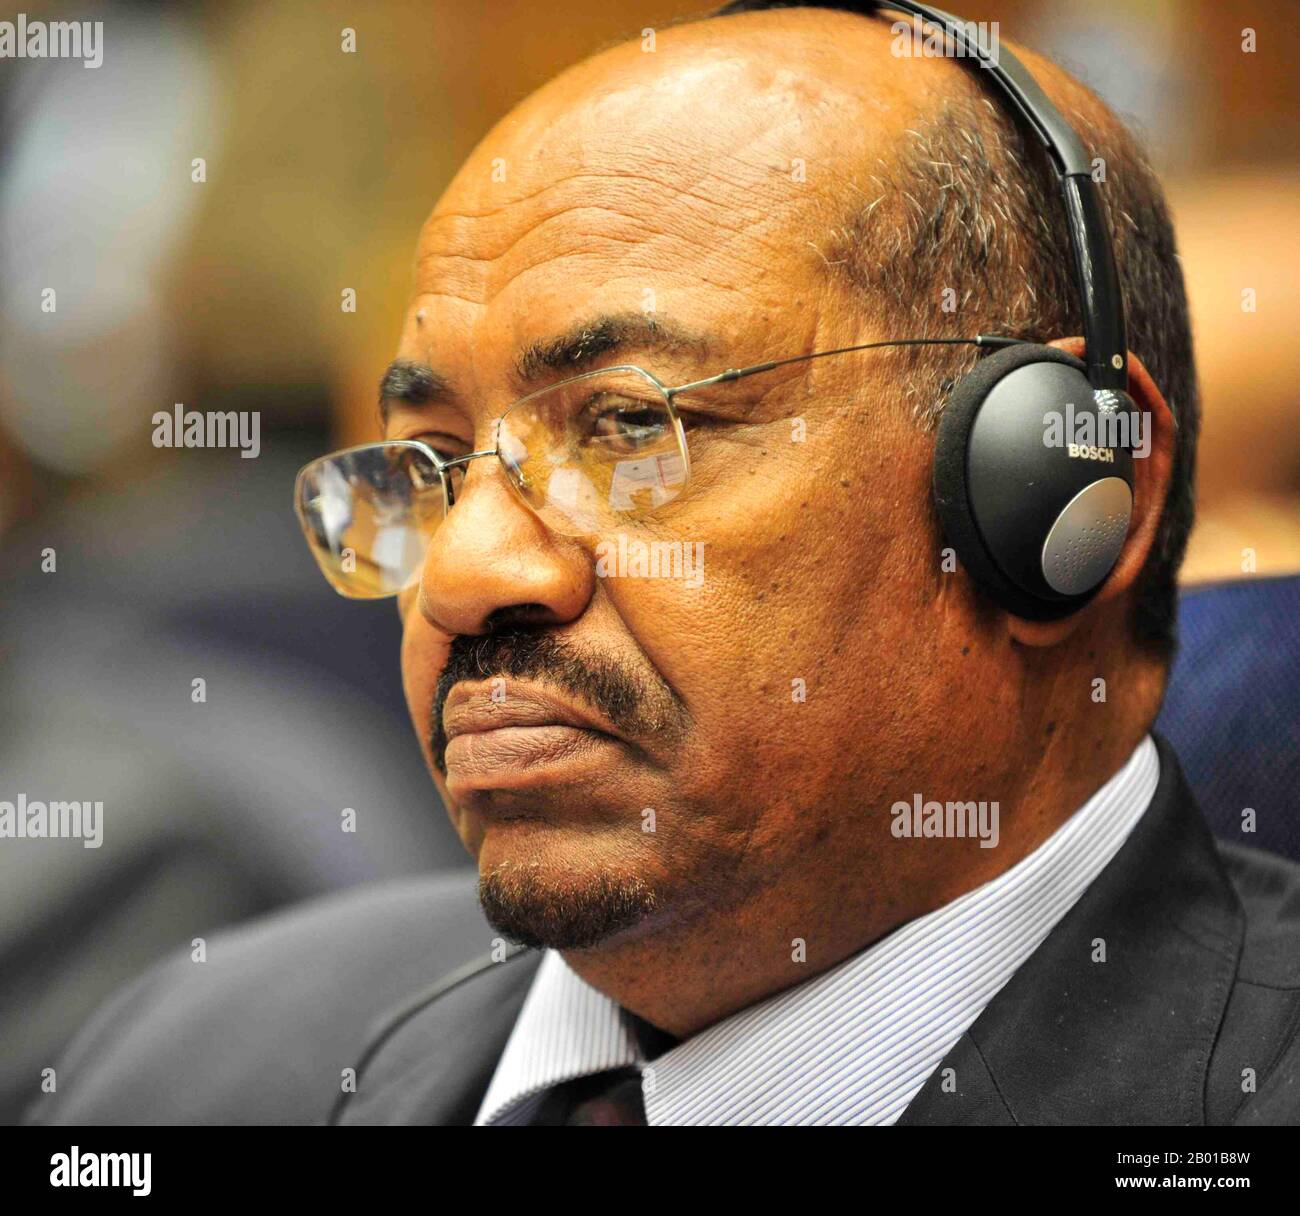 Sudan: Omar Hassan Ahmad al-Bashir, President of the Sudan (1 January 1989 -). Photo by Jesse B. Awalt (public domain), Addis Ababa, 31 January 2009.  Field Marshal Omar Hassan Ahmad Al-Bashir is the former President of Sudan who served as the seventh head of state of Sudan under various titles from 1989 until he was desposed in a coup in 2019. He came to power in 1989 when he led a group of officers in a bloodless coup that ousted the government of Prime Minister Sadiq al-Mahdi. Bashir is the first sitting head of state to ever indicted by the International Criminal Court, for genocide. Stock Photo